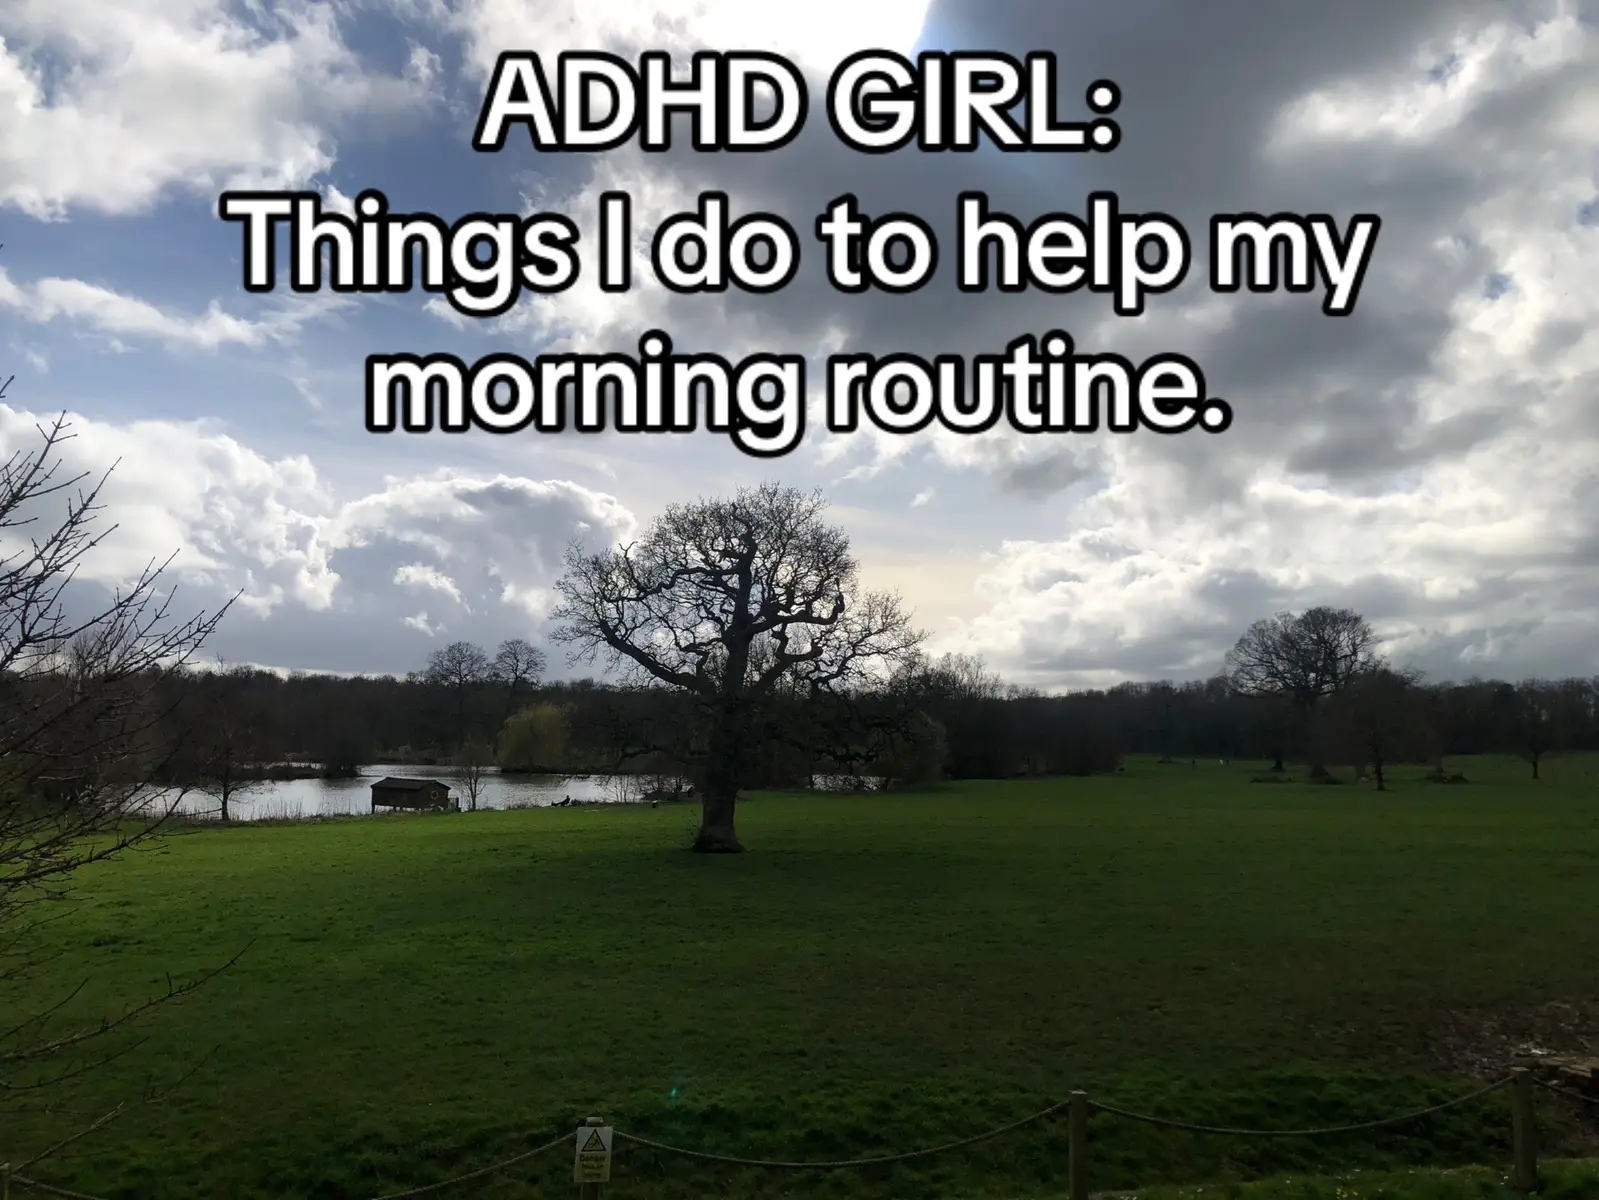 Things I do to help my mornings flow better and be less stressful. 🧠🧚🏻‍♀️ what are your top tips?! #adhdmorningroutine #adhd #adhdtips #adhdtok #ndfairy